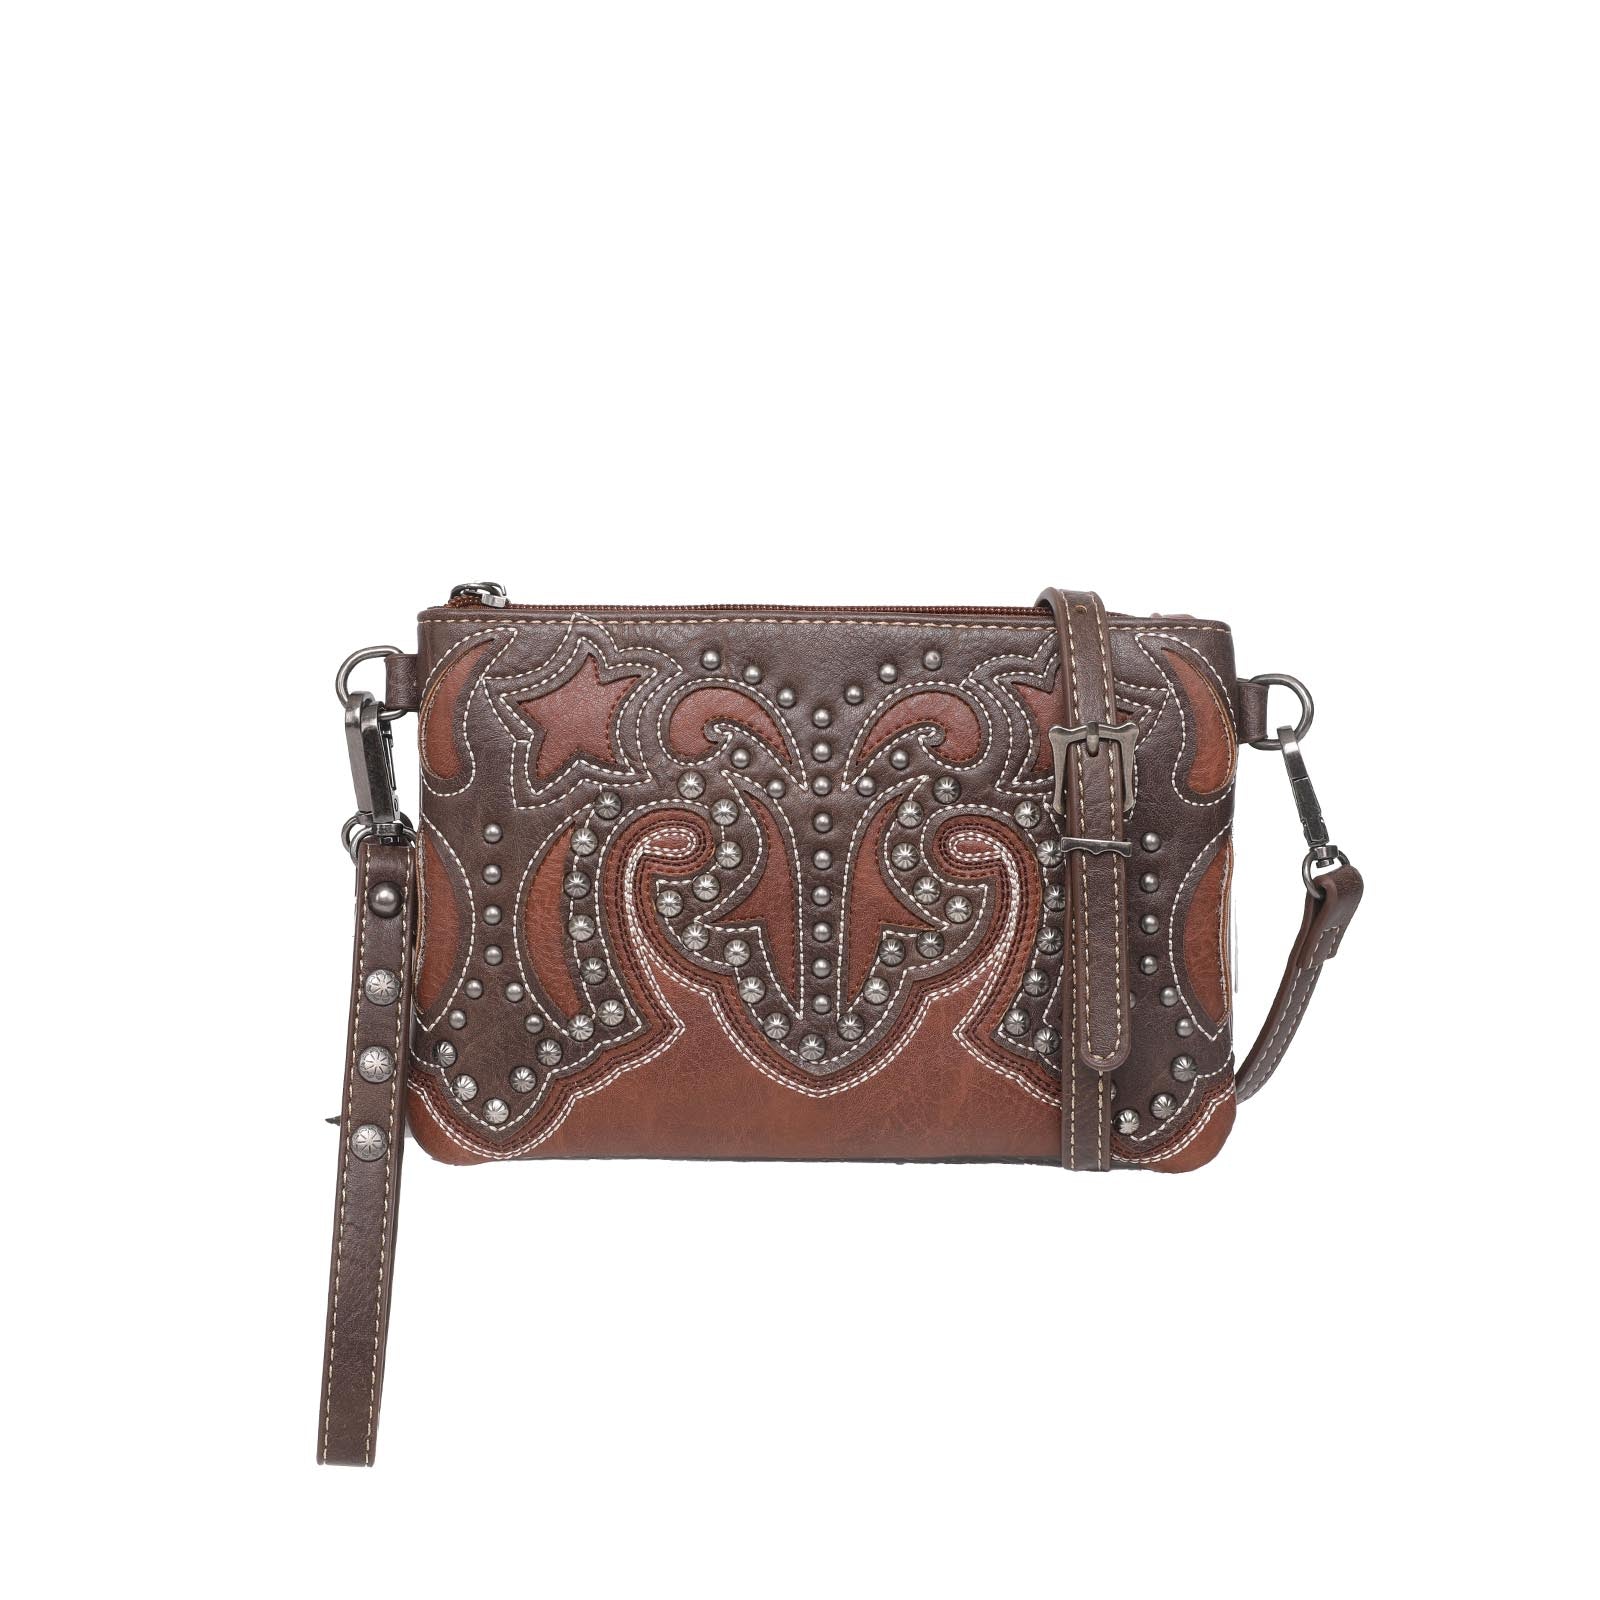 Montana West Embroidered Collection Clutch/Crossbody - Cowgirl Wear